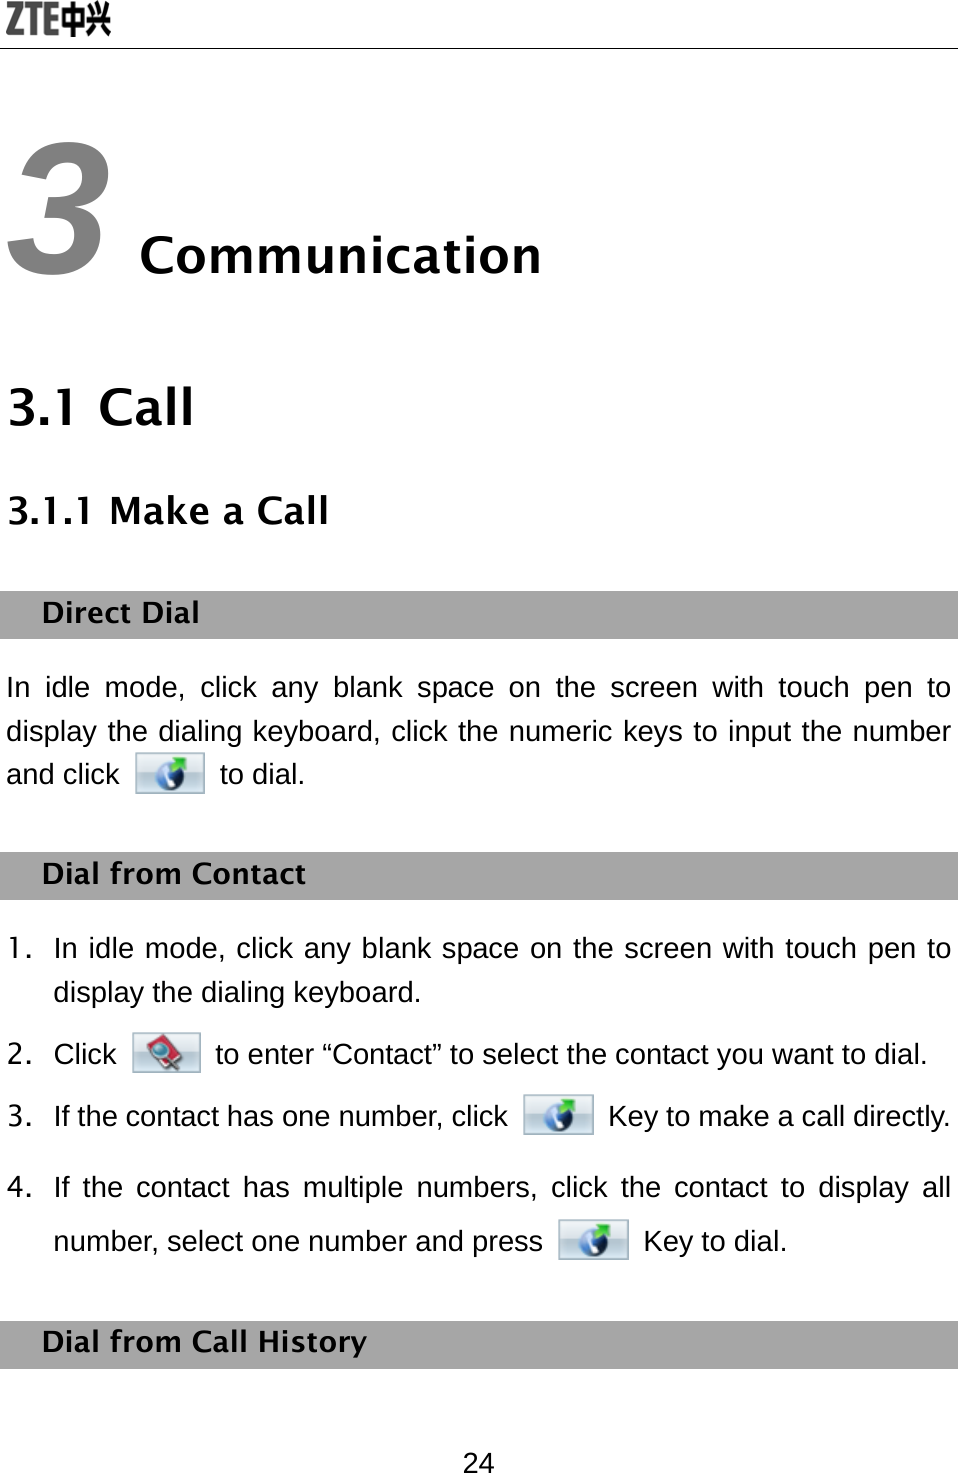  24 3 Communication 3.1 Call 3.1.1 Make a Call Direct Dial In idle mode, click any blank space on the screen with touch pen to display the dialing keyboard, click the numeric keys to input the number and click   to dial. Dial from Contact 1.  In idle mode, click any blank space on the screen with touch pen to display the dialing keyboard. 2. Click    to enter “Contact” to select the contact you want to dial. 3.  If the contact has one number, click  Key to make a call directly. 4.  If the contact has multiple numbers, click the contact to display all number, select one number and press   Key to dial. Dial from Call History 